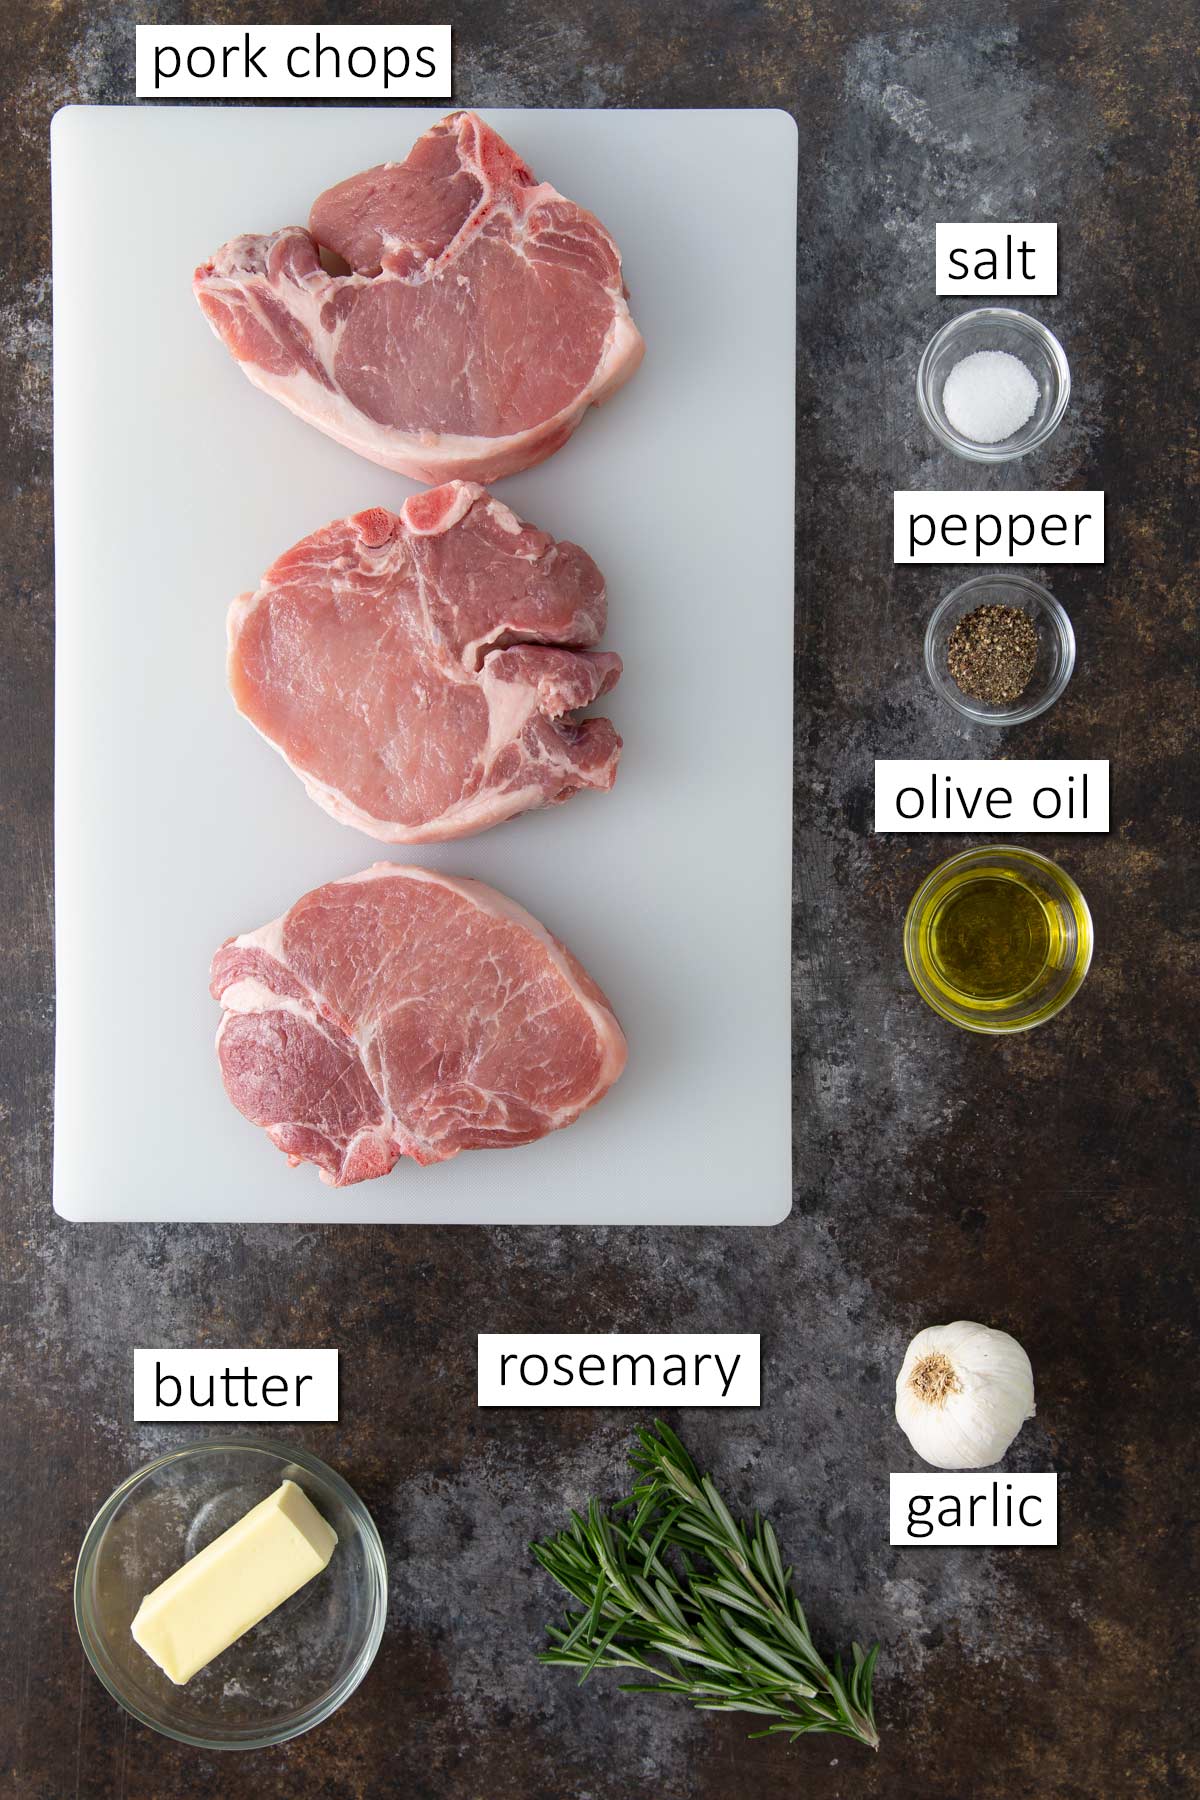 Overhead view of ingredients for baked pork chops with rosemary and garlic.